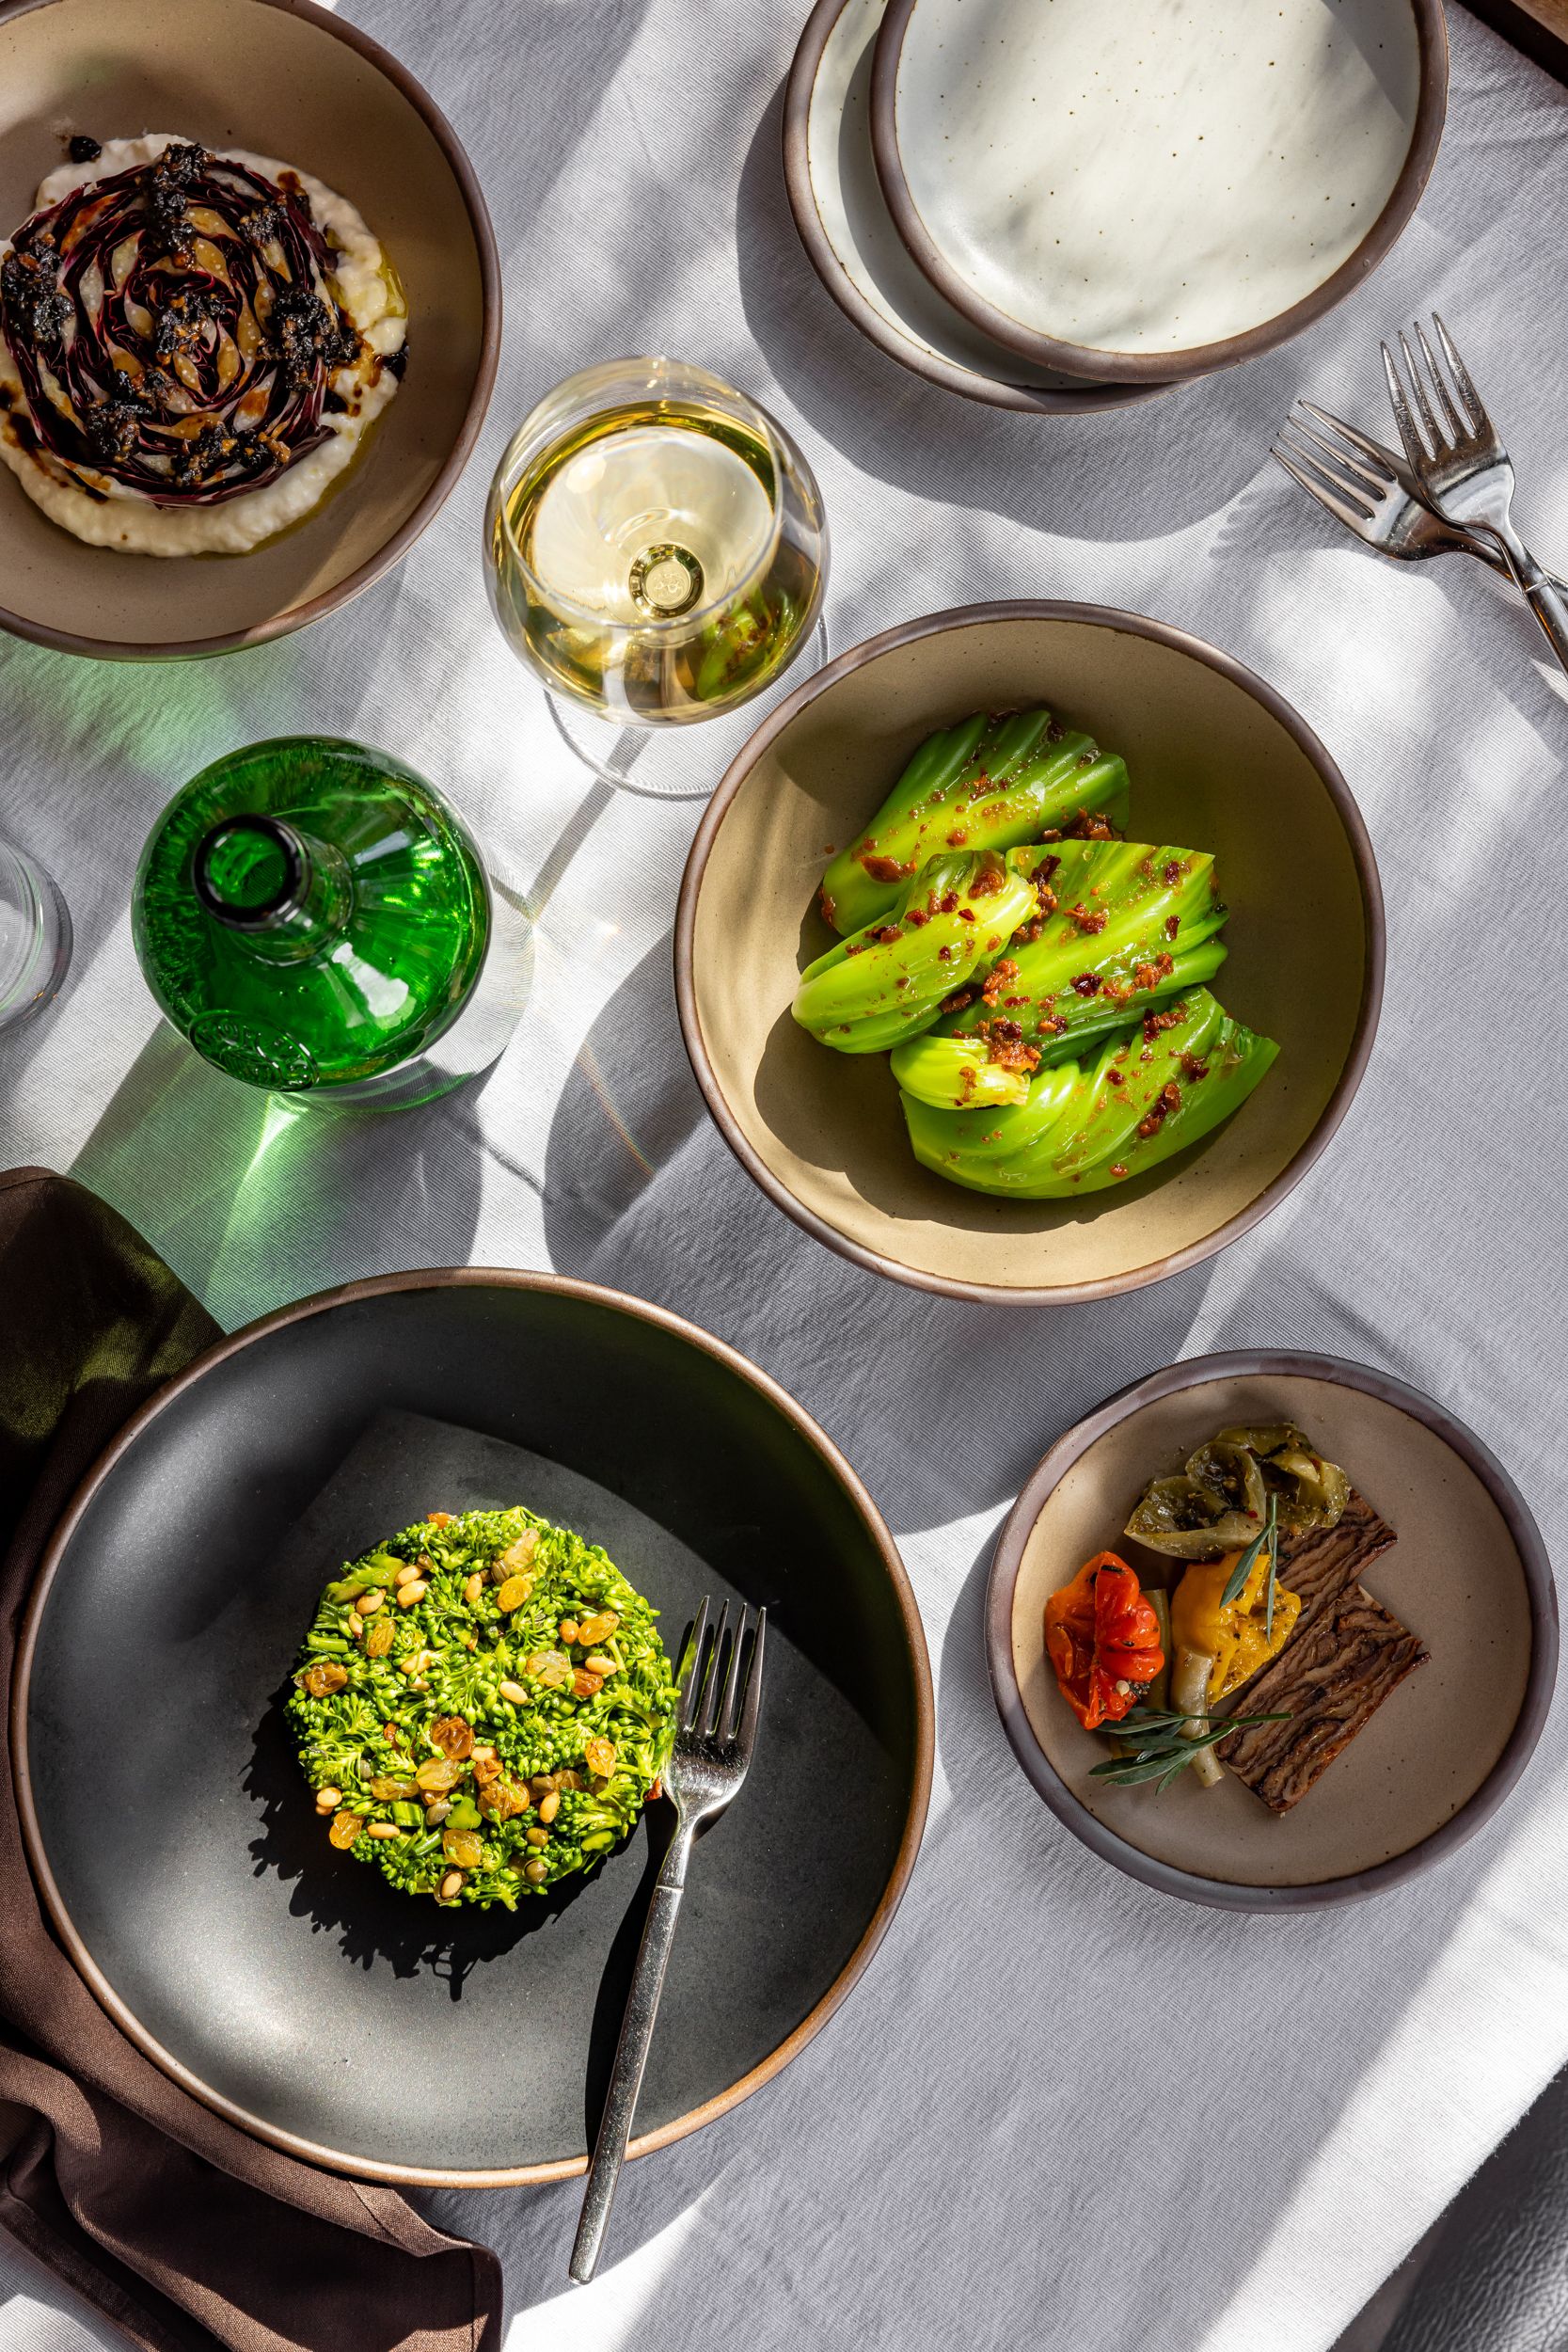 On a table, there are ceramic bowls in black and neutral colors filled with fresh foods, surrounded by a wine glass, green bottle, and silver flatware